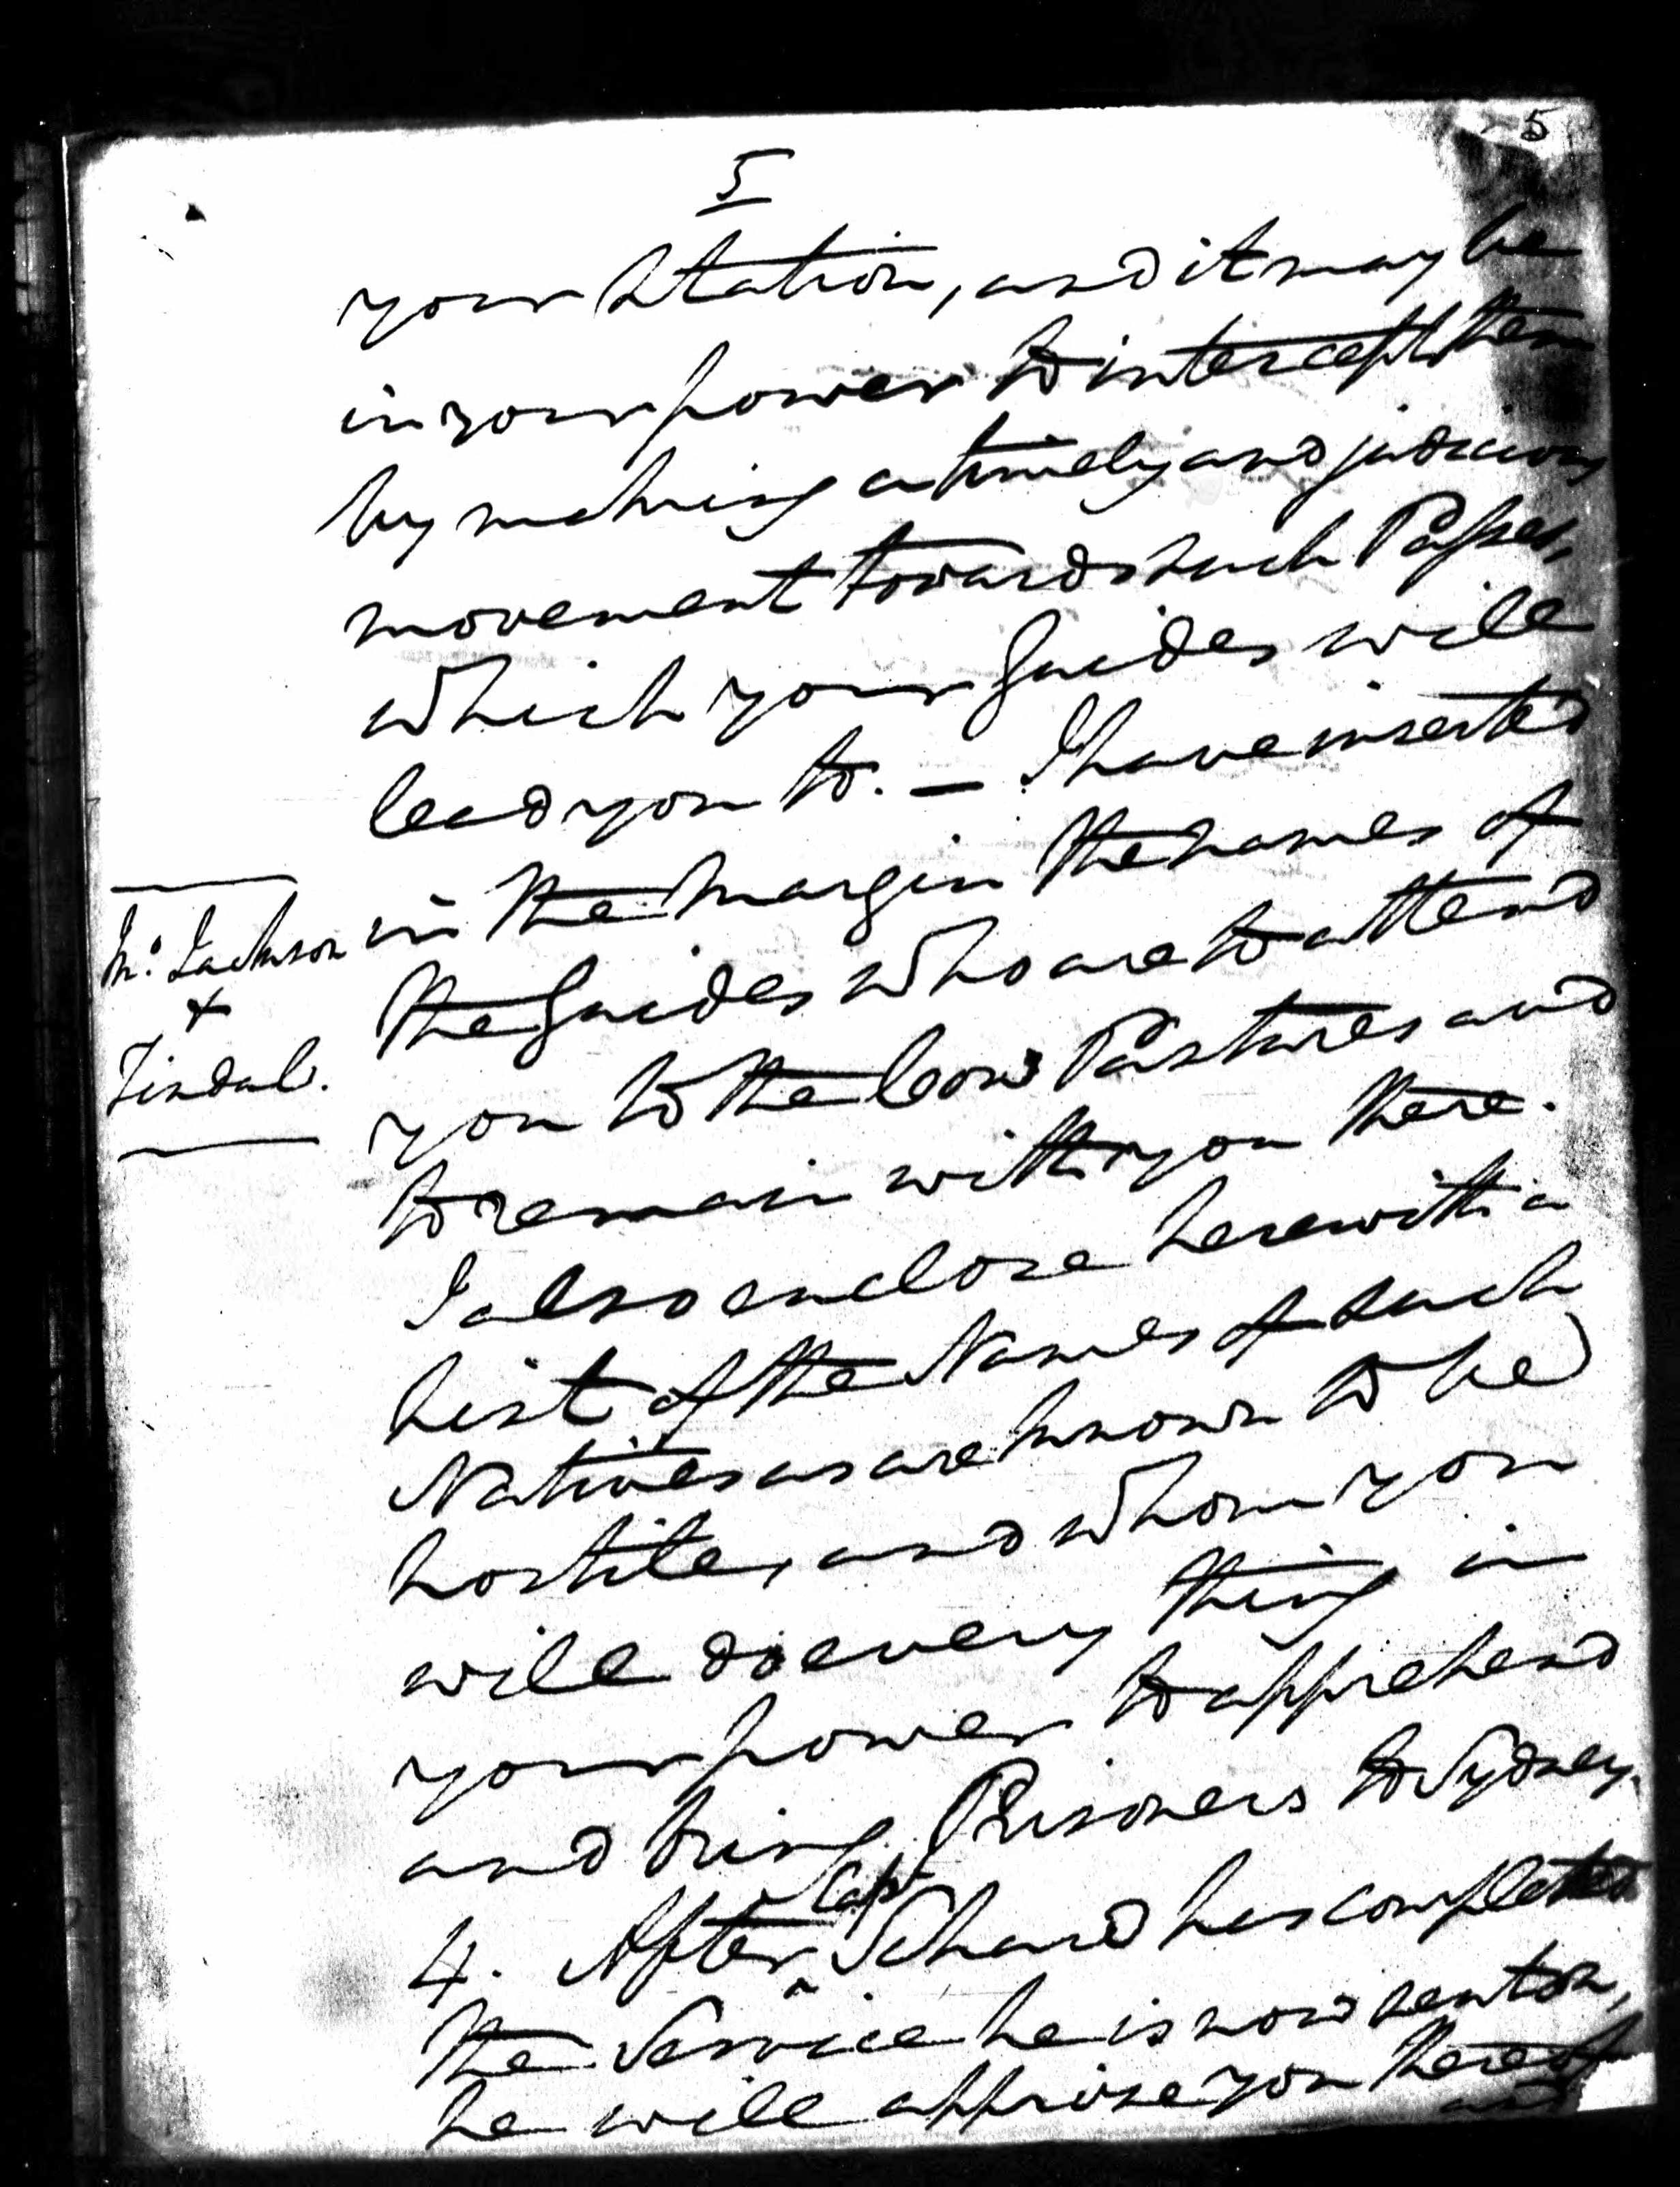 Governor Lachlan Macquarie's instructions to Captain Schaw, page 5